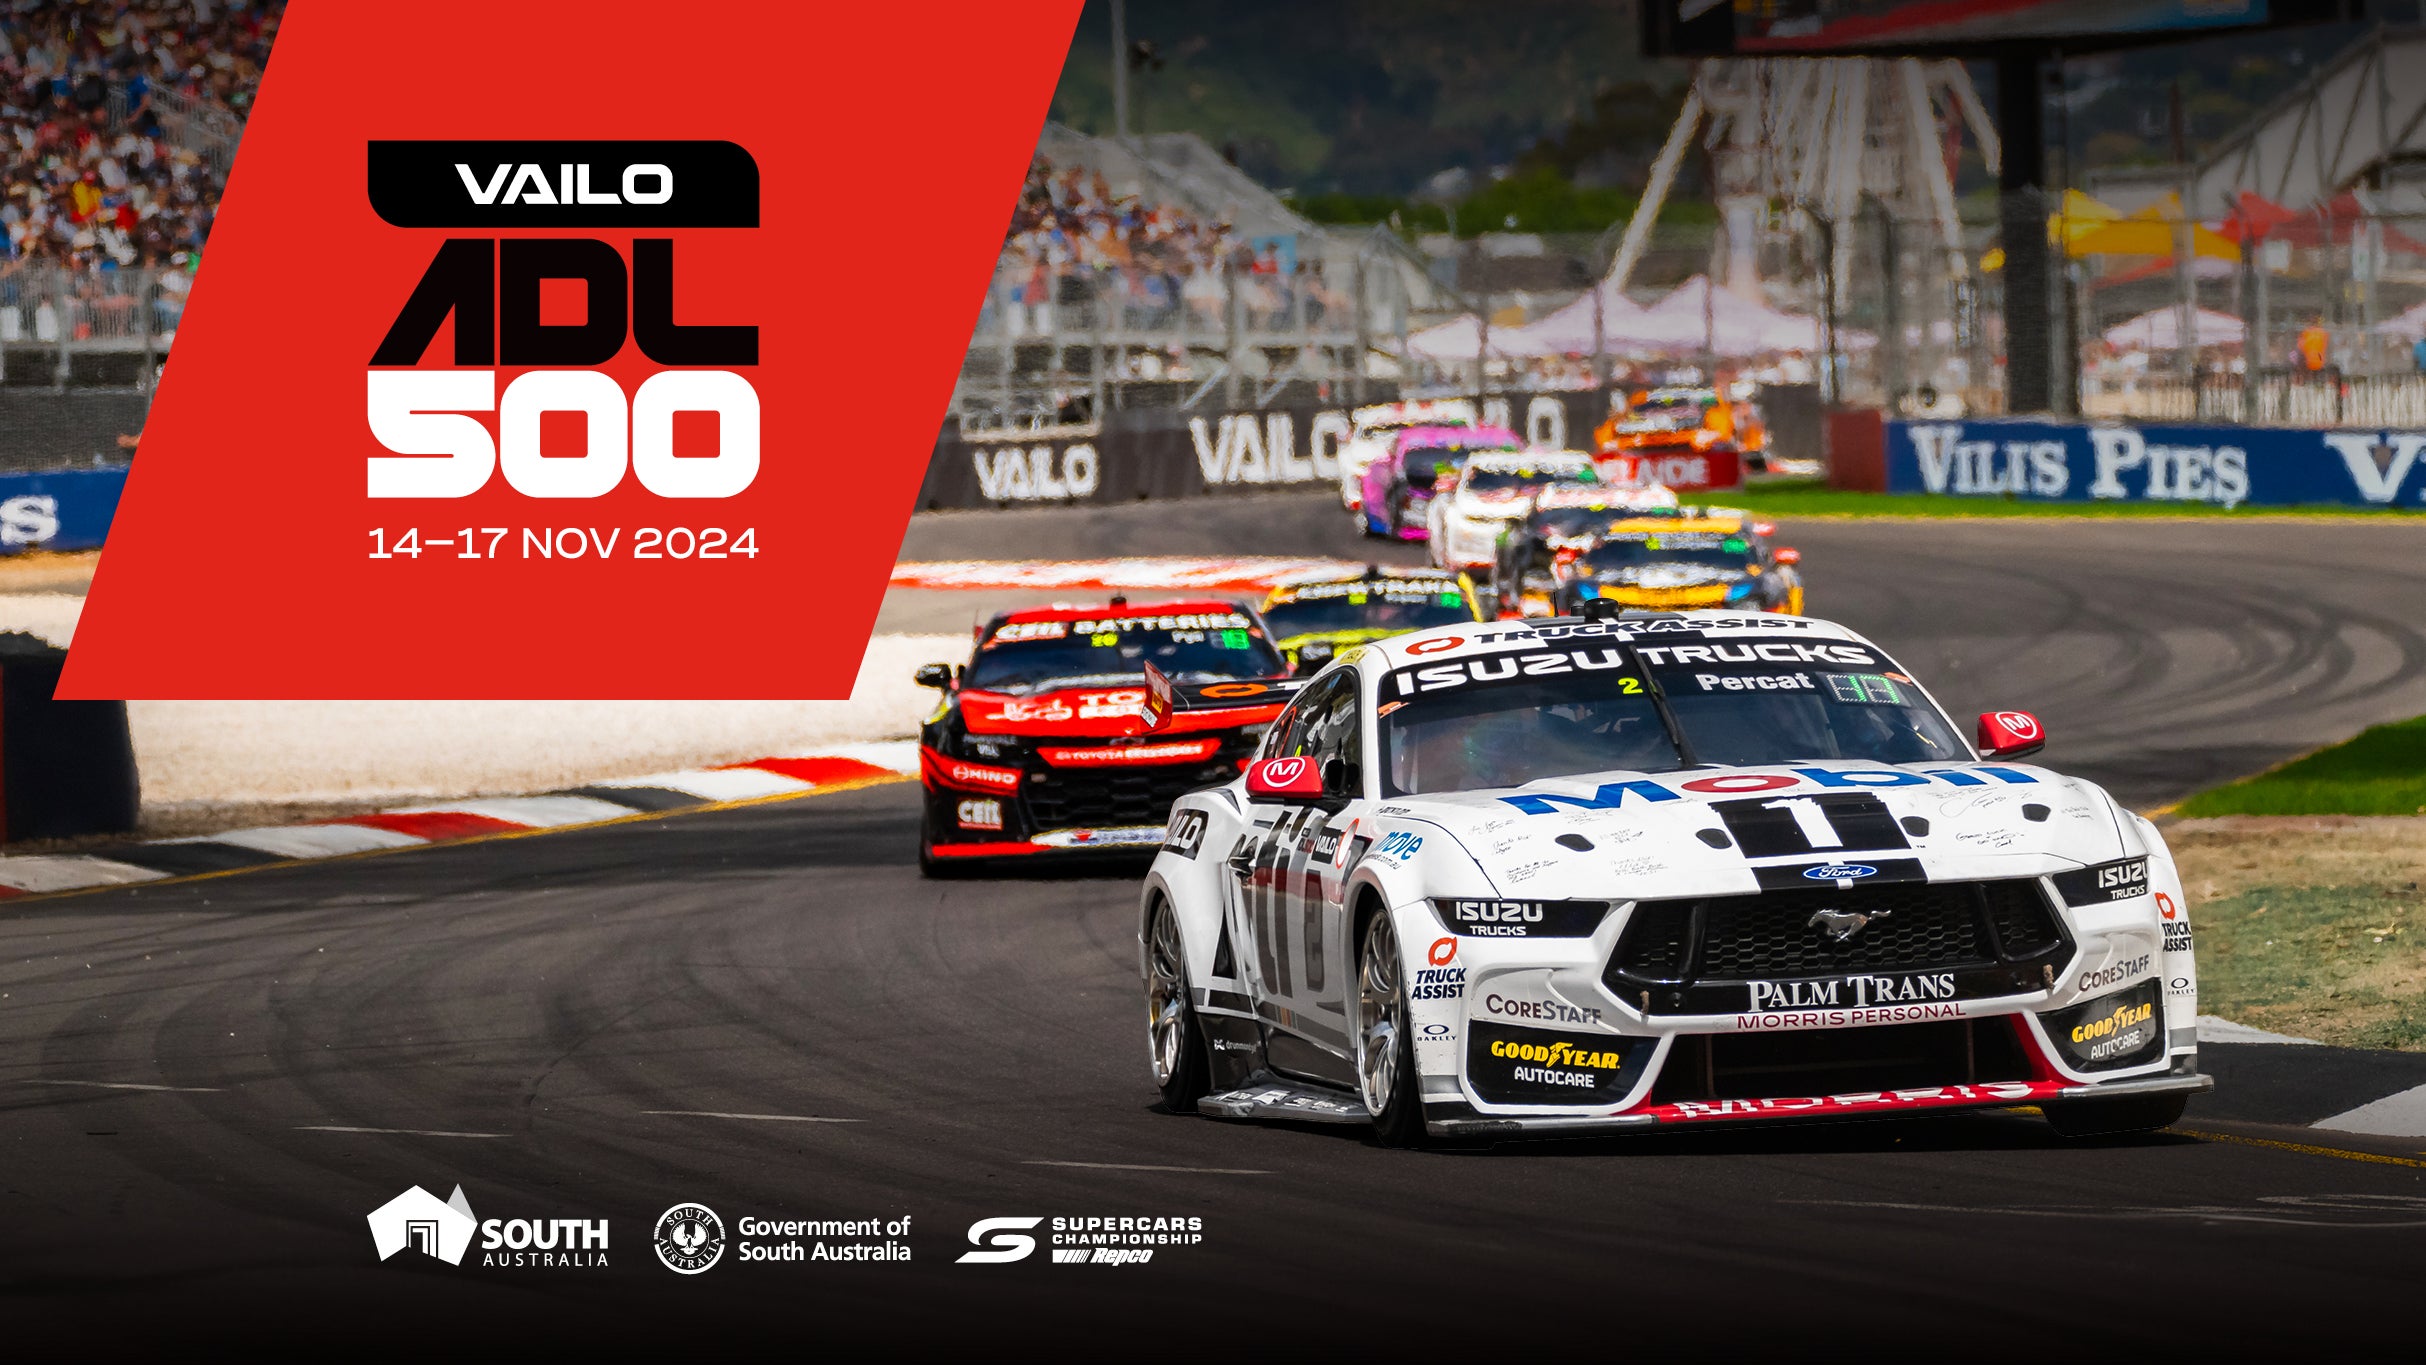 VAILO Adelaide 500 - Pit Entry Grandstand Thursday - Sunday Entry